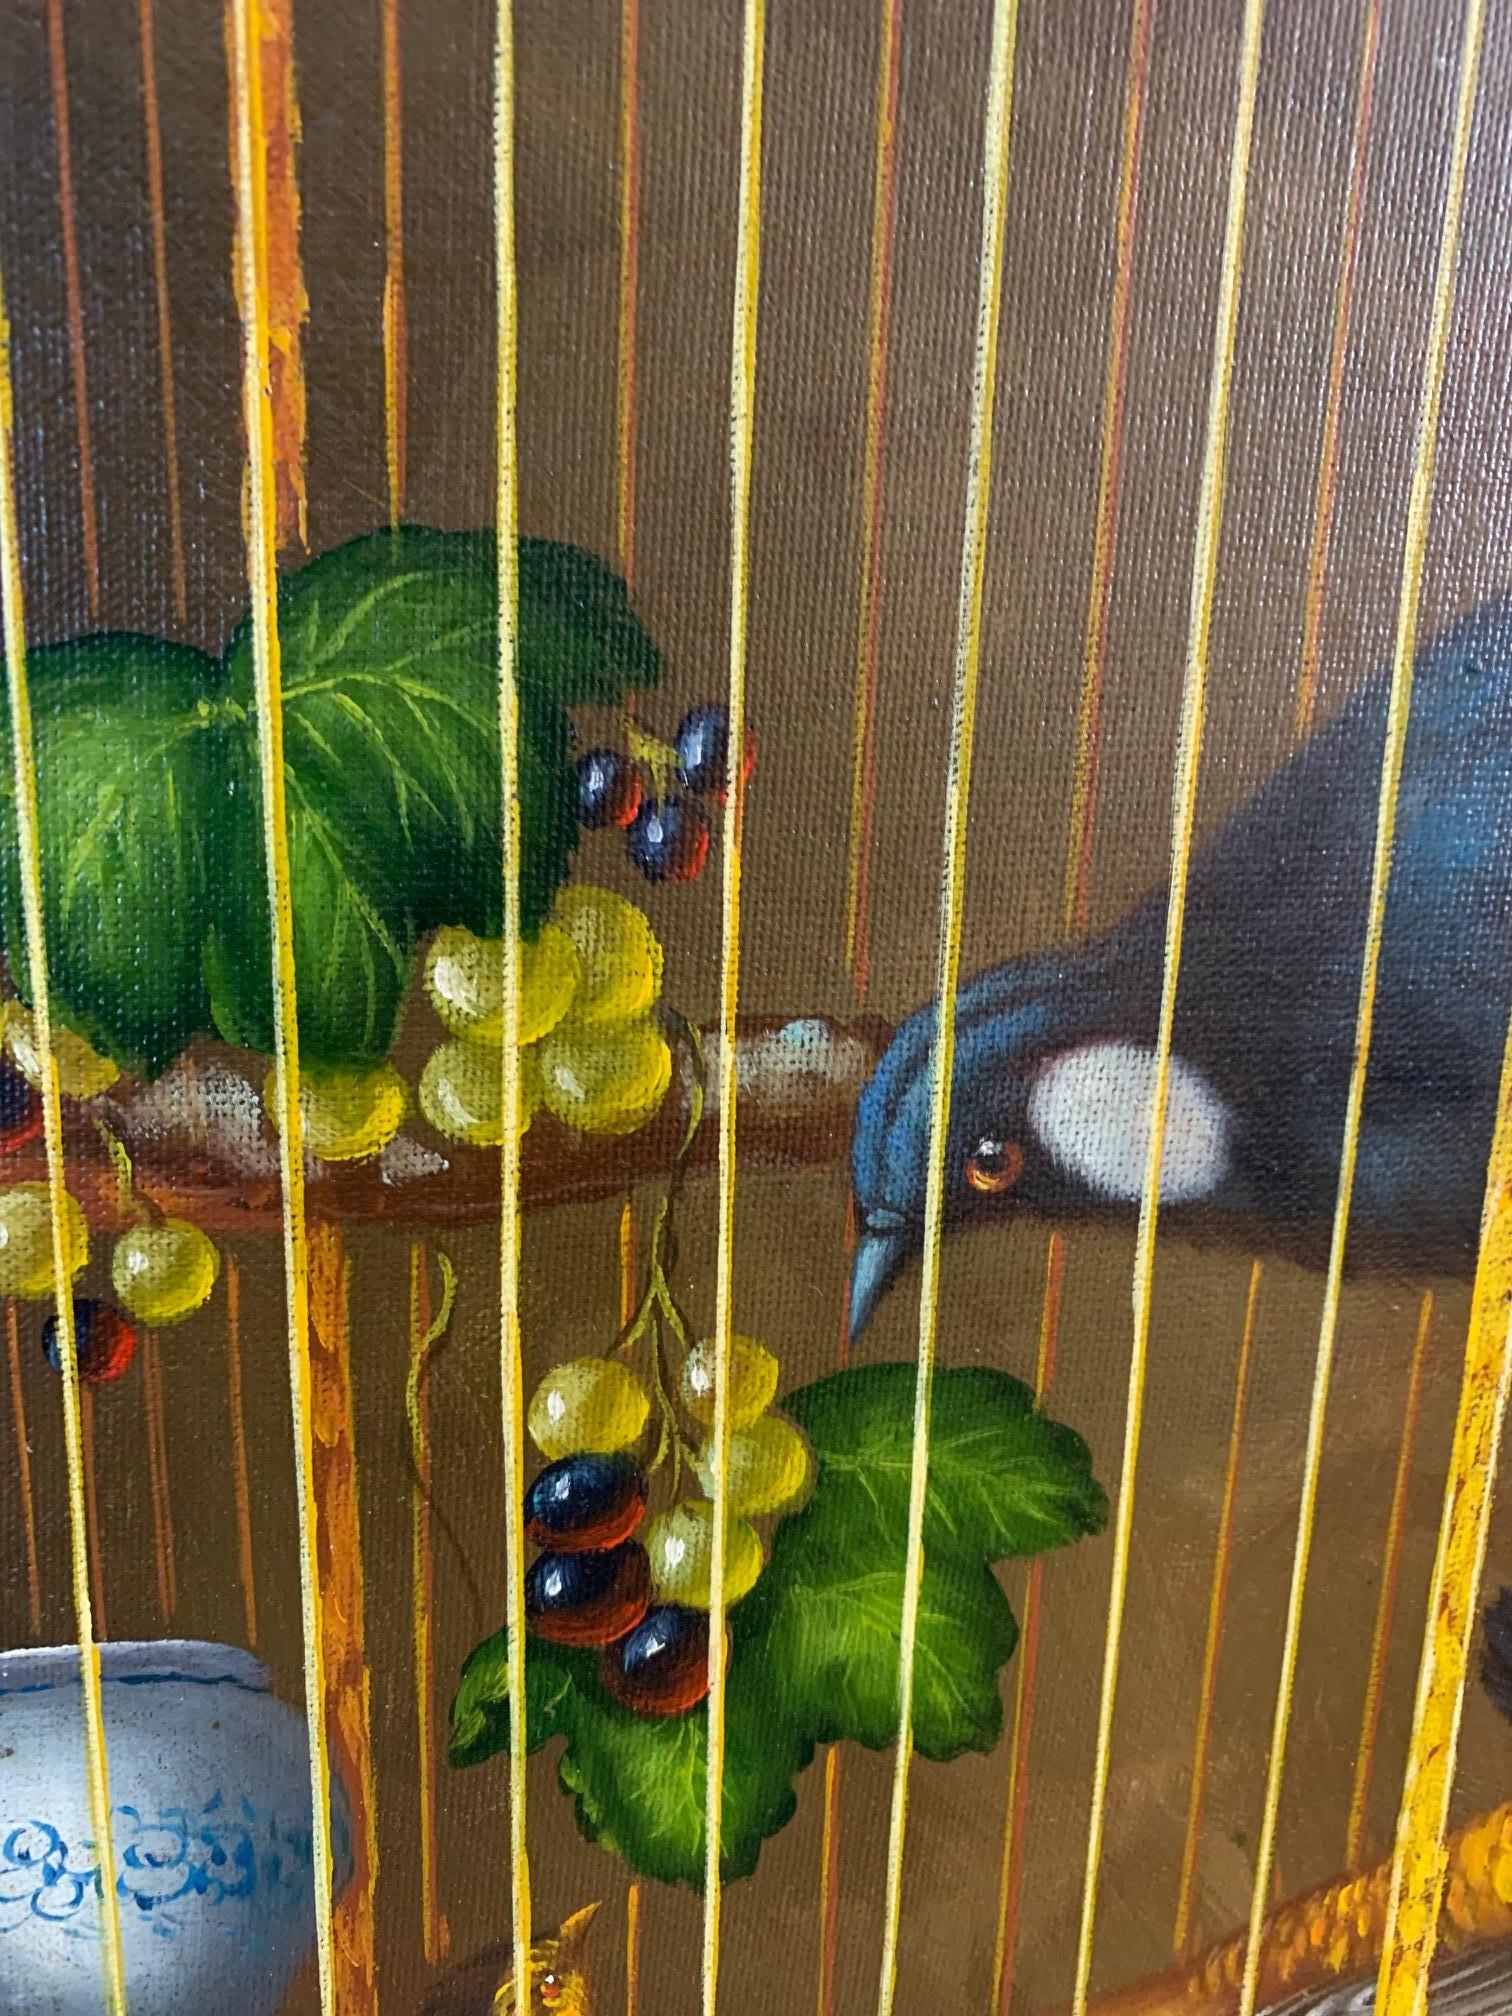 Handsome oil on board still life painting of birds in a decorative birdcage outfitted with berries and fruit.
Note: A matching painting that is slightly different is also available to make a handsome pair.
Measures: Board 24” W x 20” H.